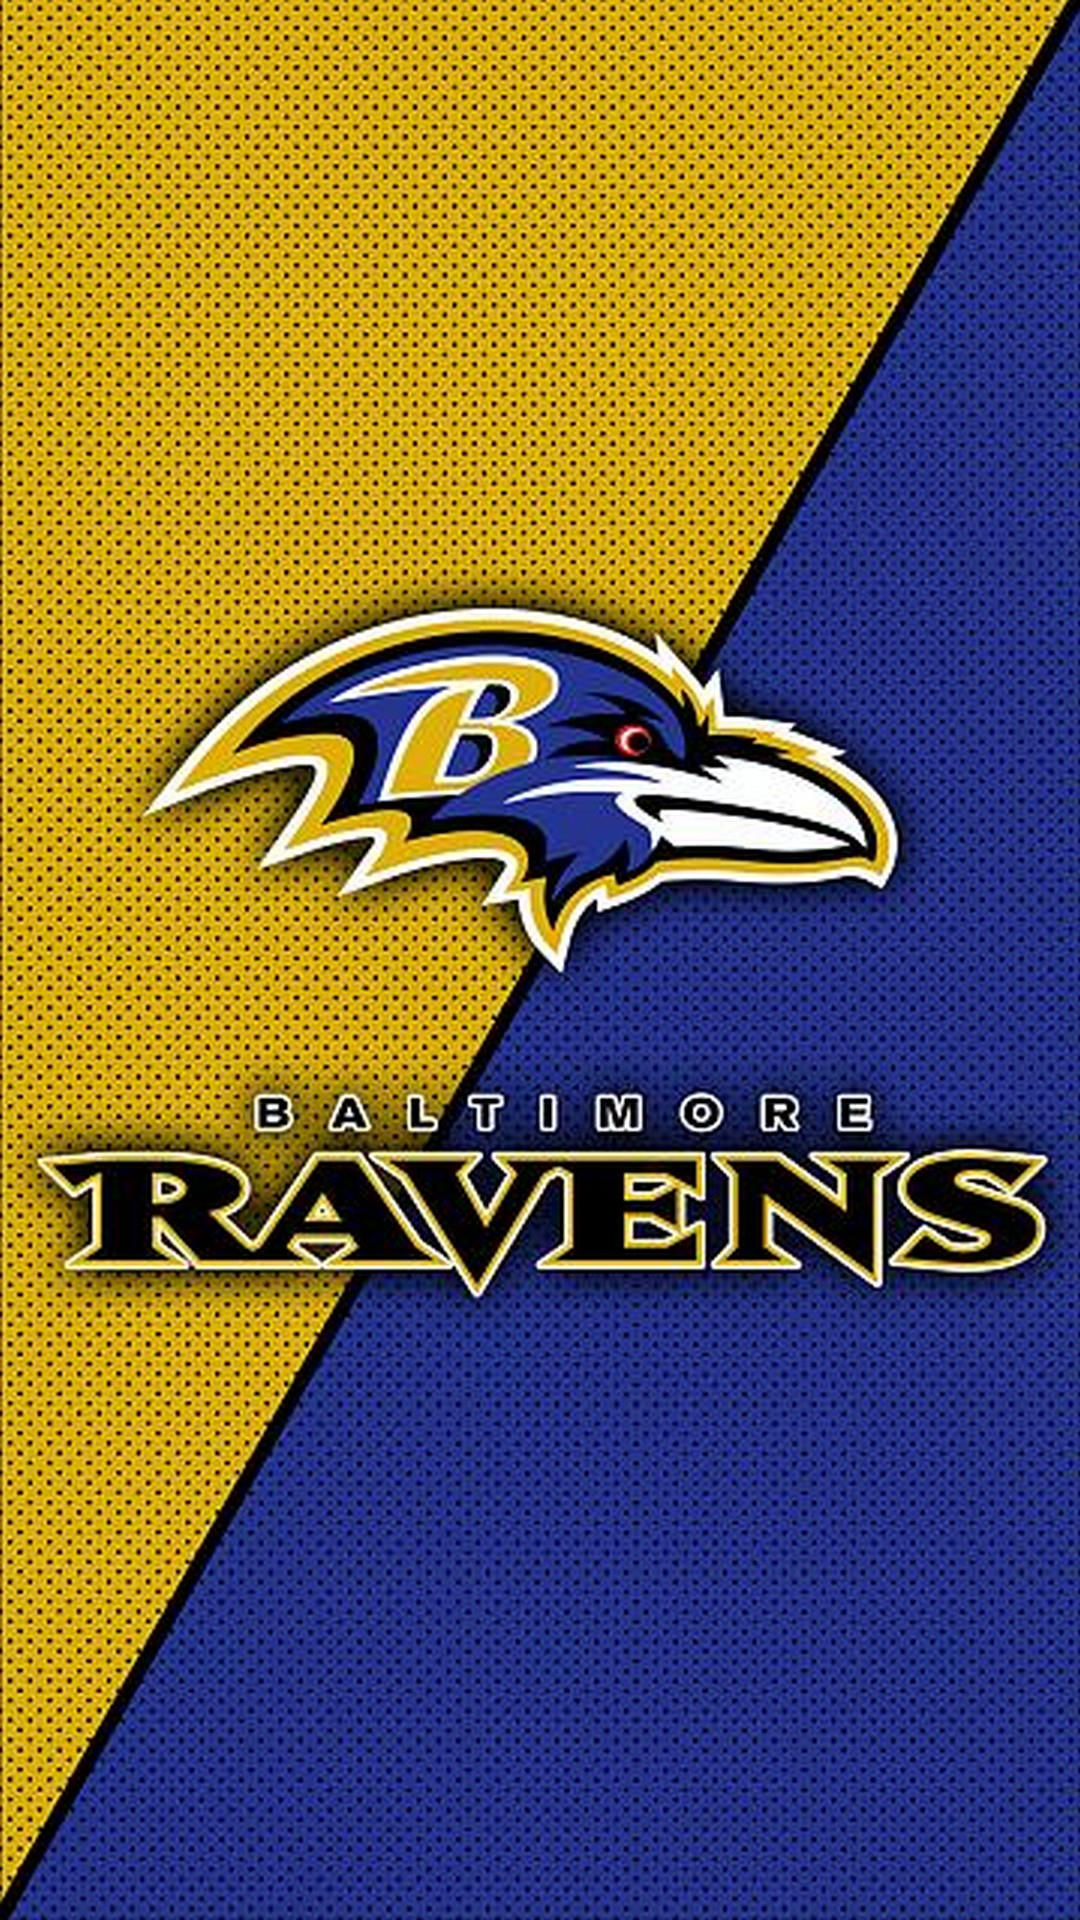 Baltimore Ravens iPhone Wallpaper Tumblr With high-resolution 1080X1920 pixel. Download and set as wallpaper for Apple iPhone X, XS Max, XR, 8, 7, 6, SE, iPad, Android